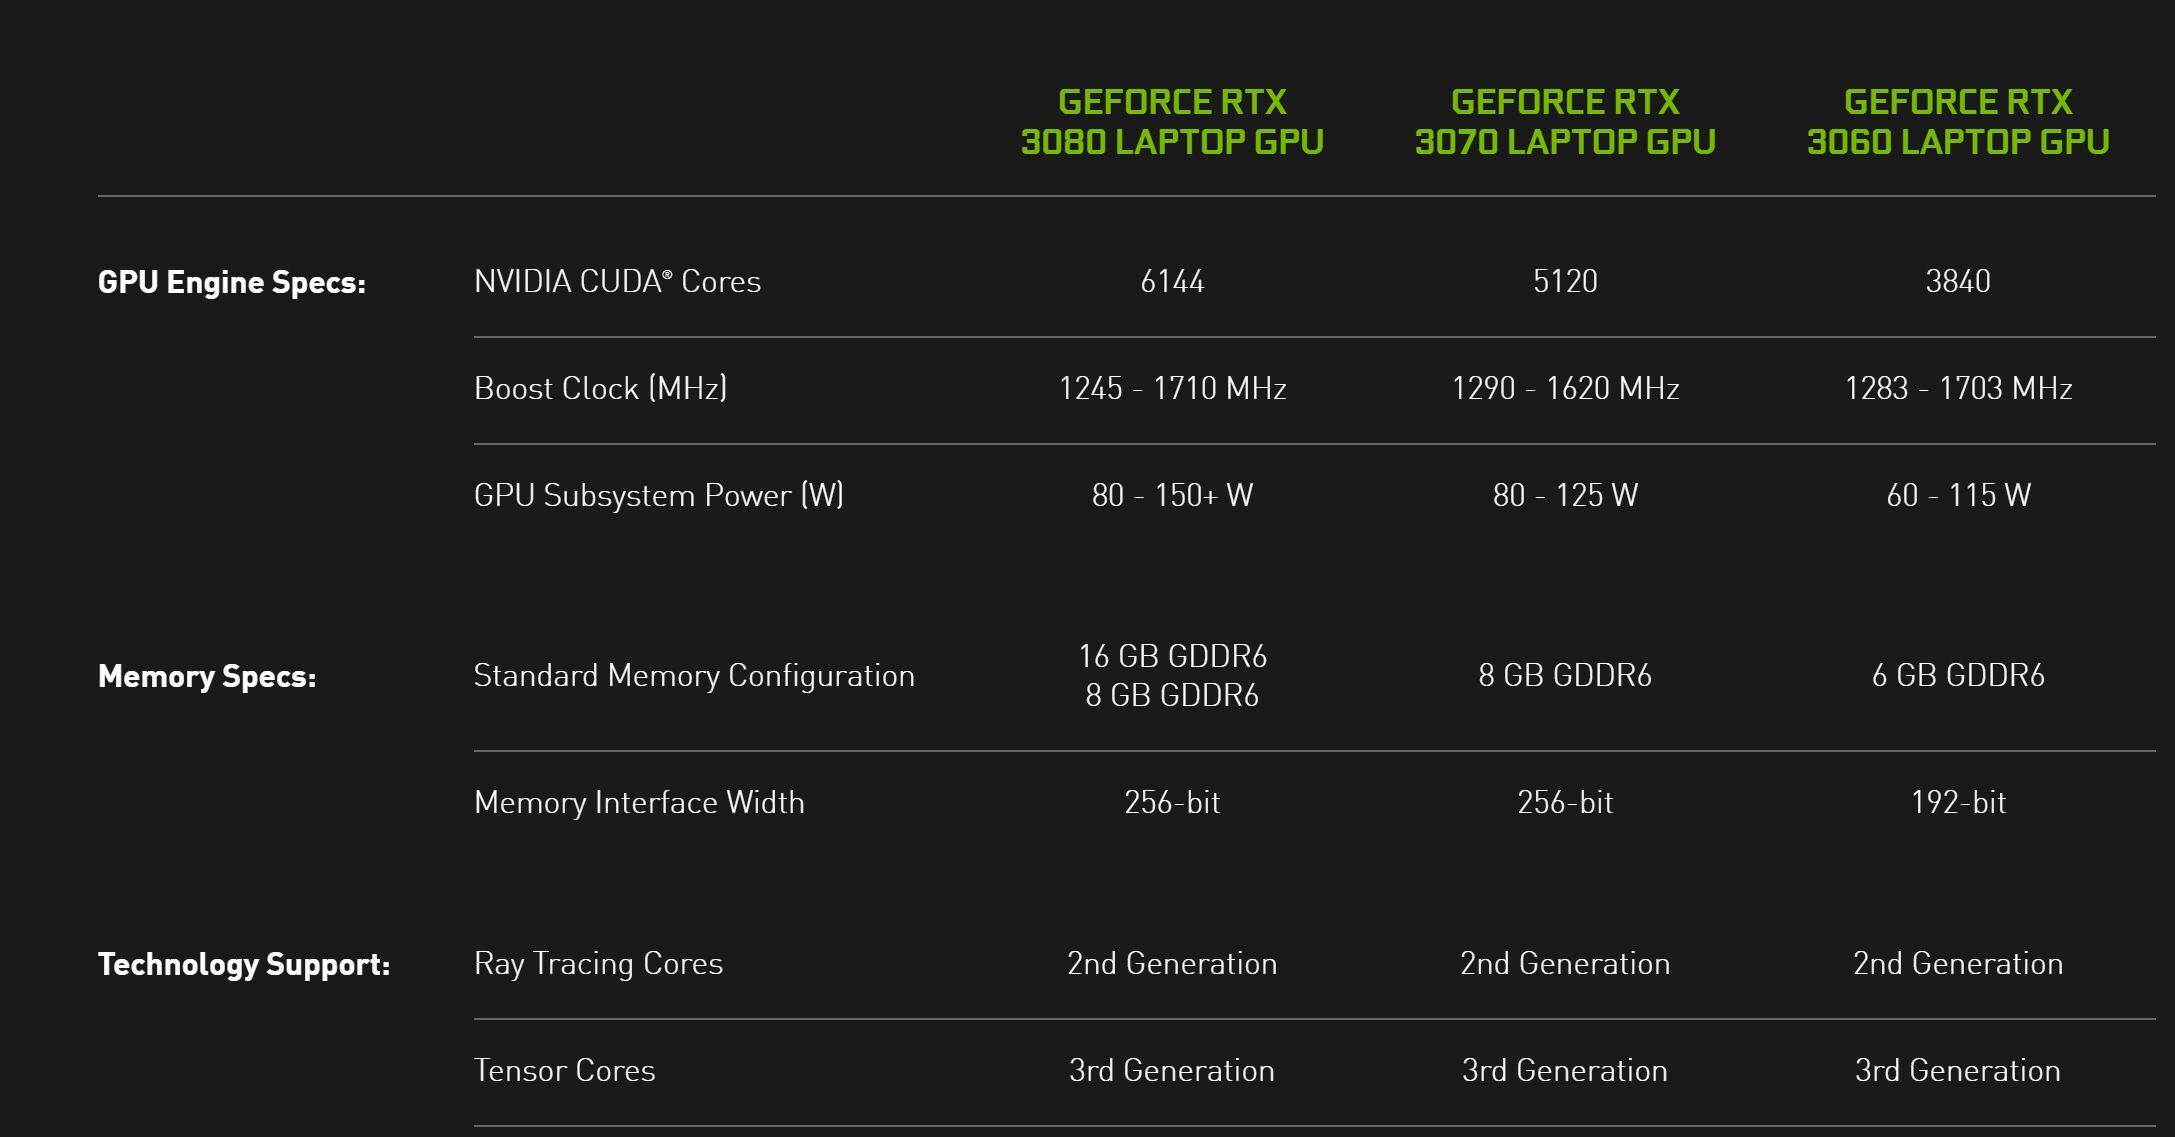 How to tell which GeForce 30-series laptop is the most powerful